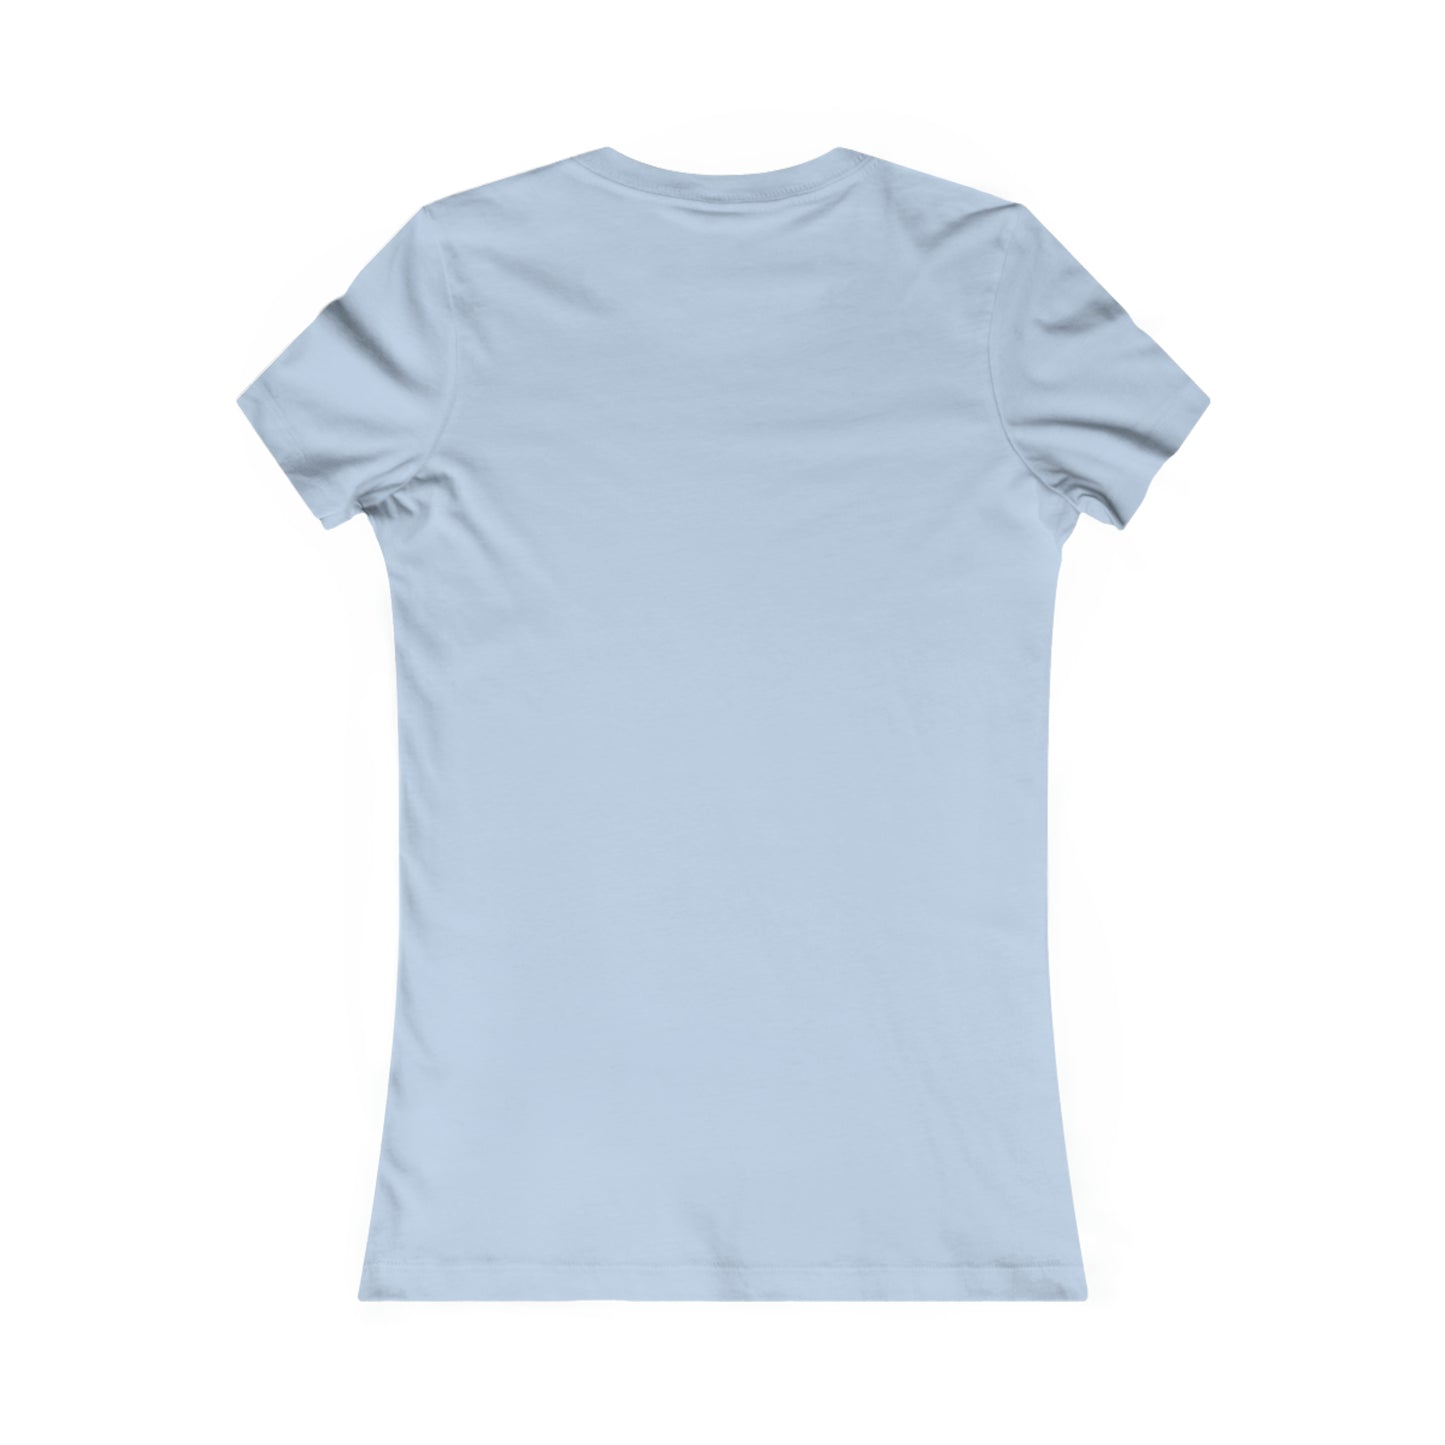 "Beards & Curves Women's Tee Shirts - Perfect Blend of Comfort & Style"